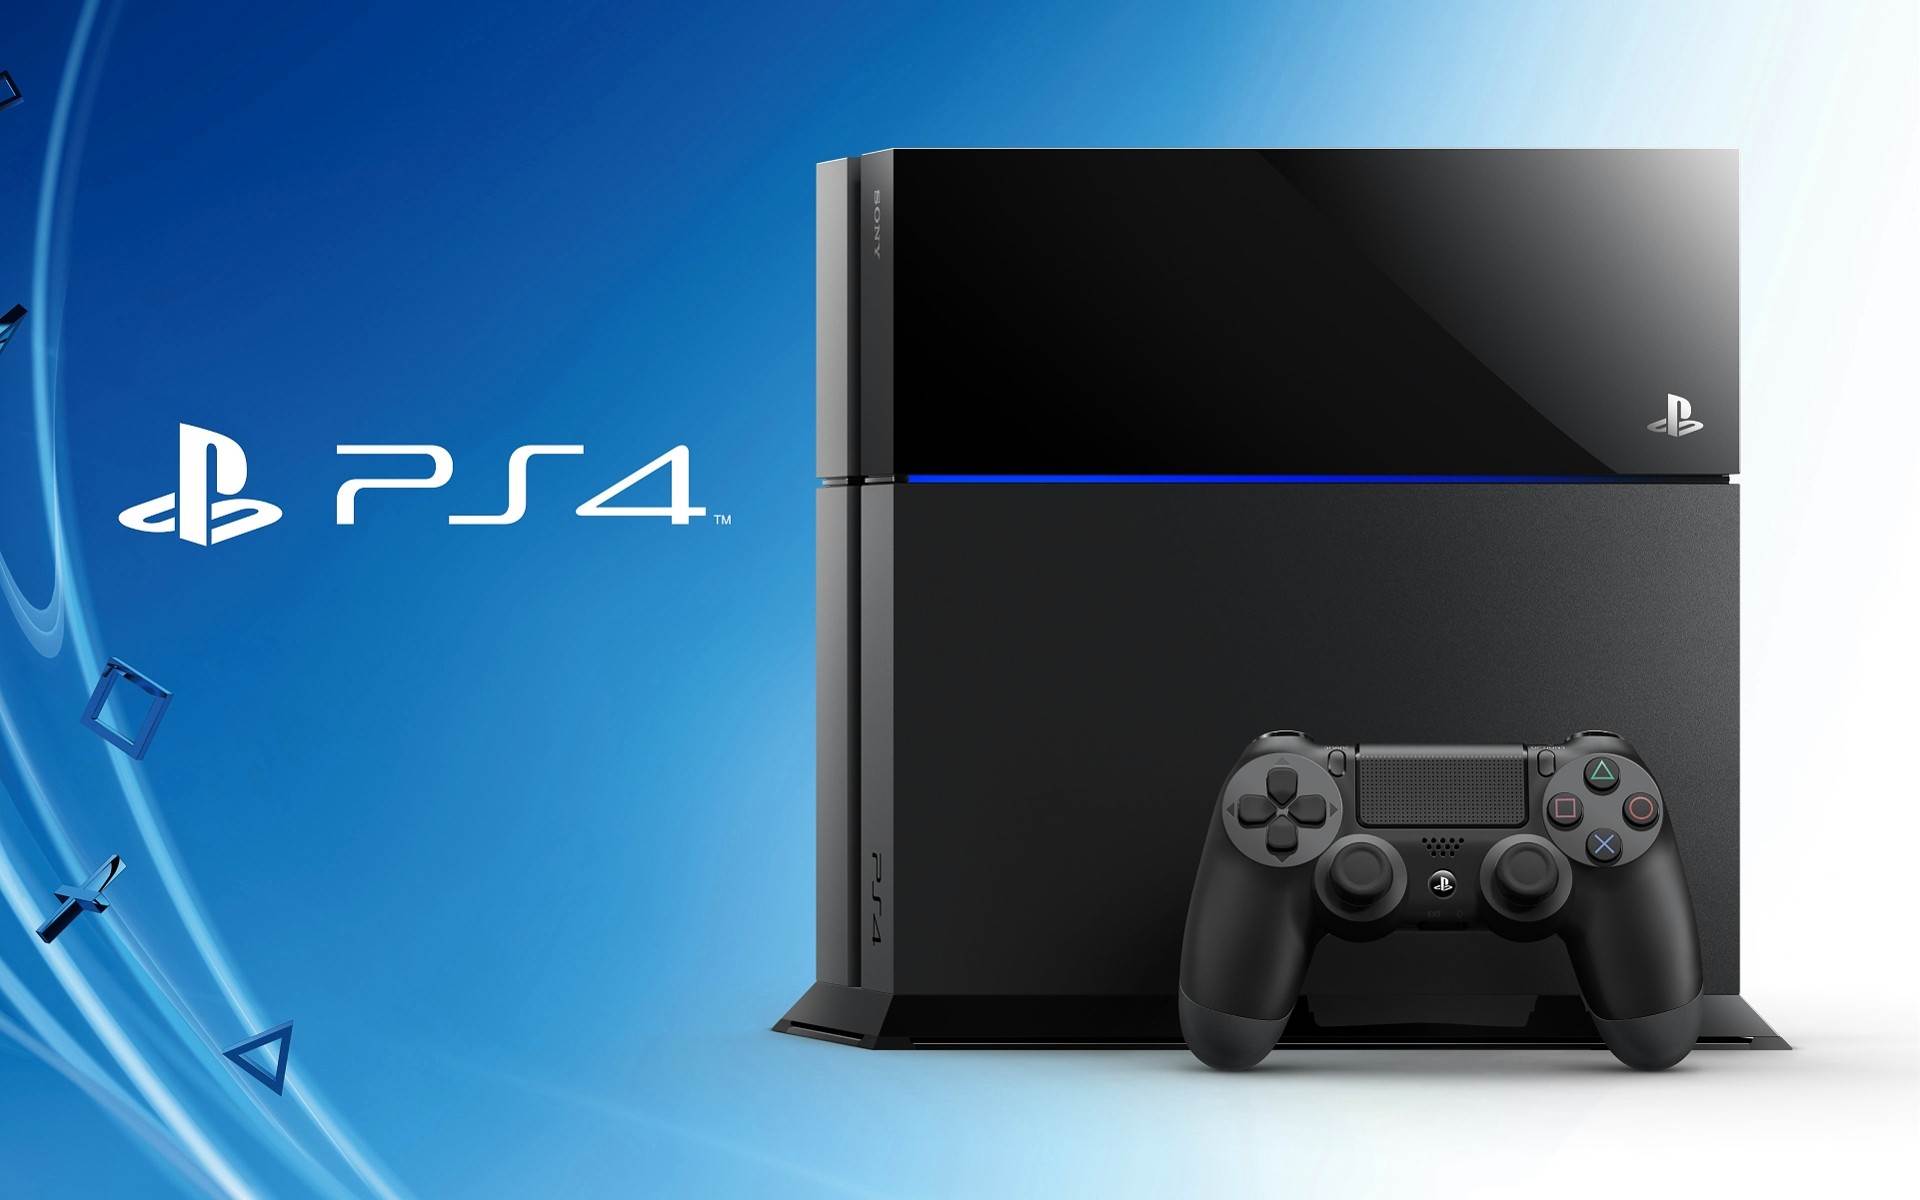 Here are some cool PS4 HD wallpapers for your desktop